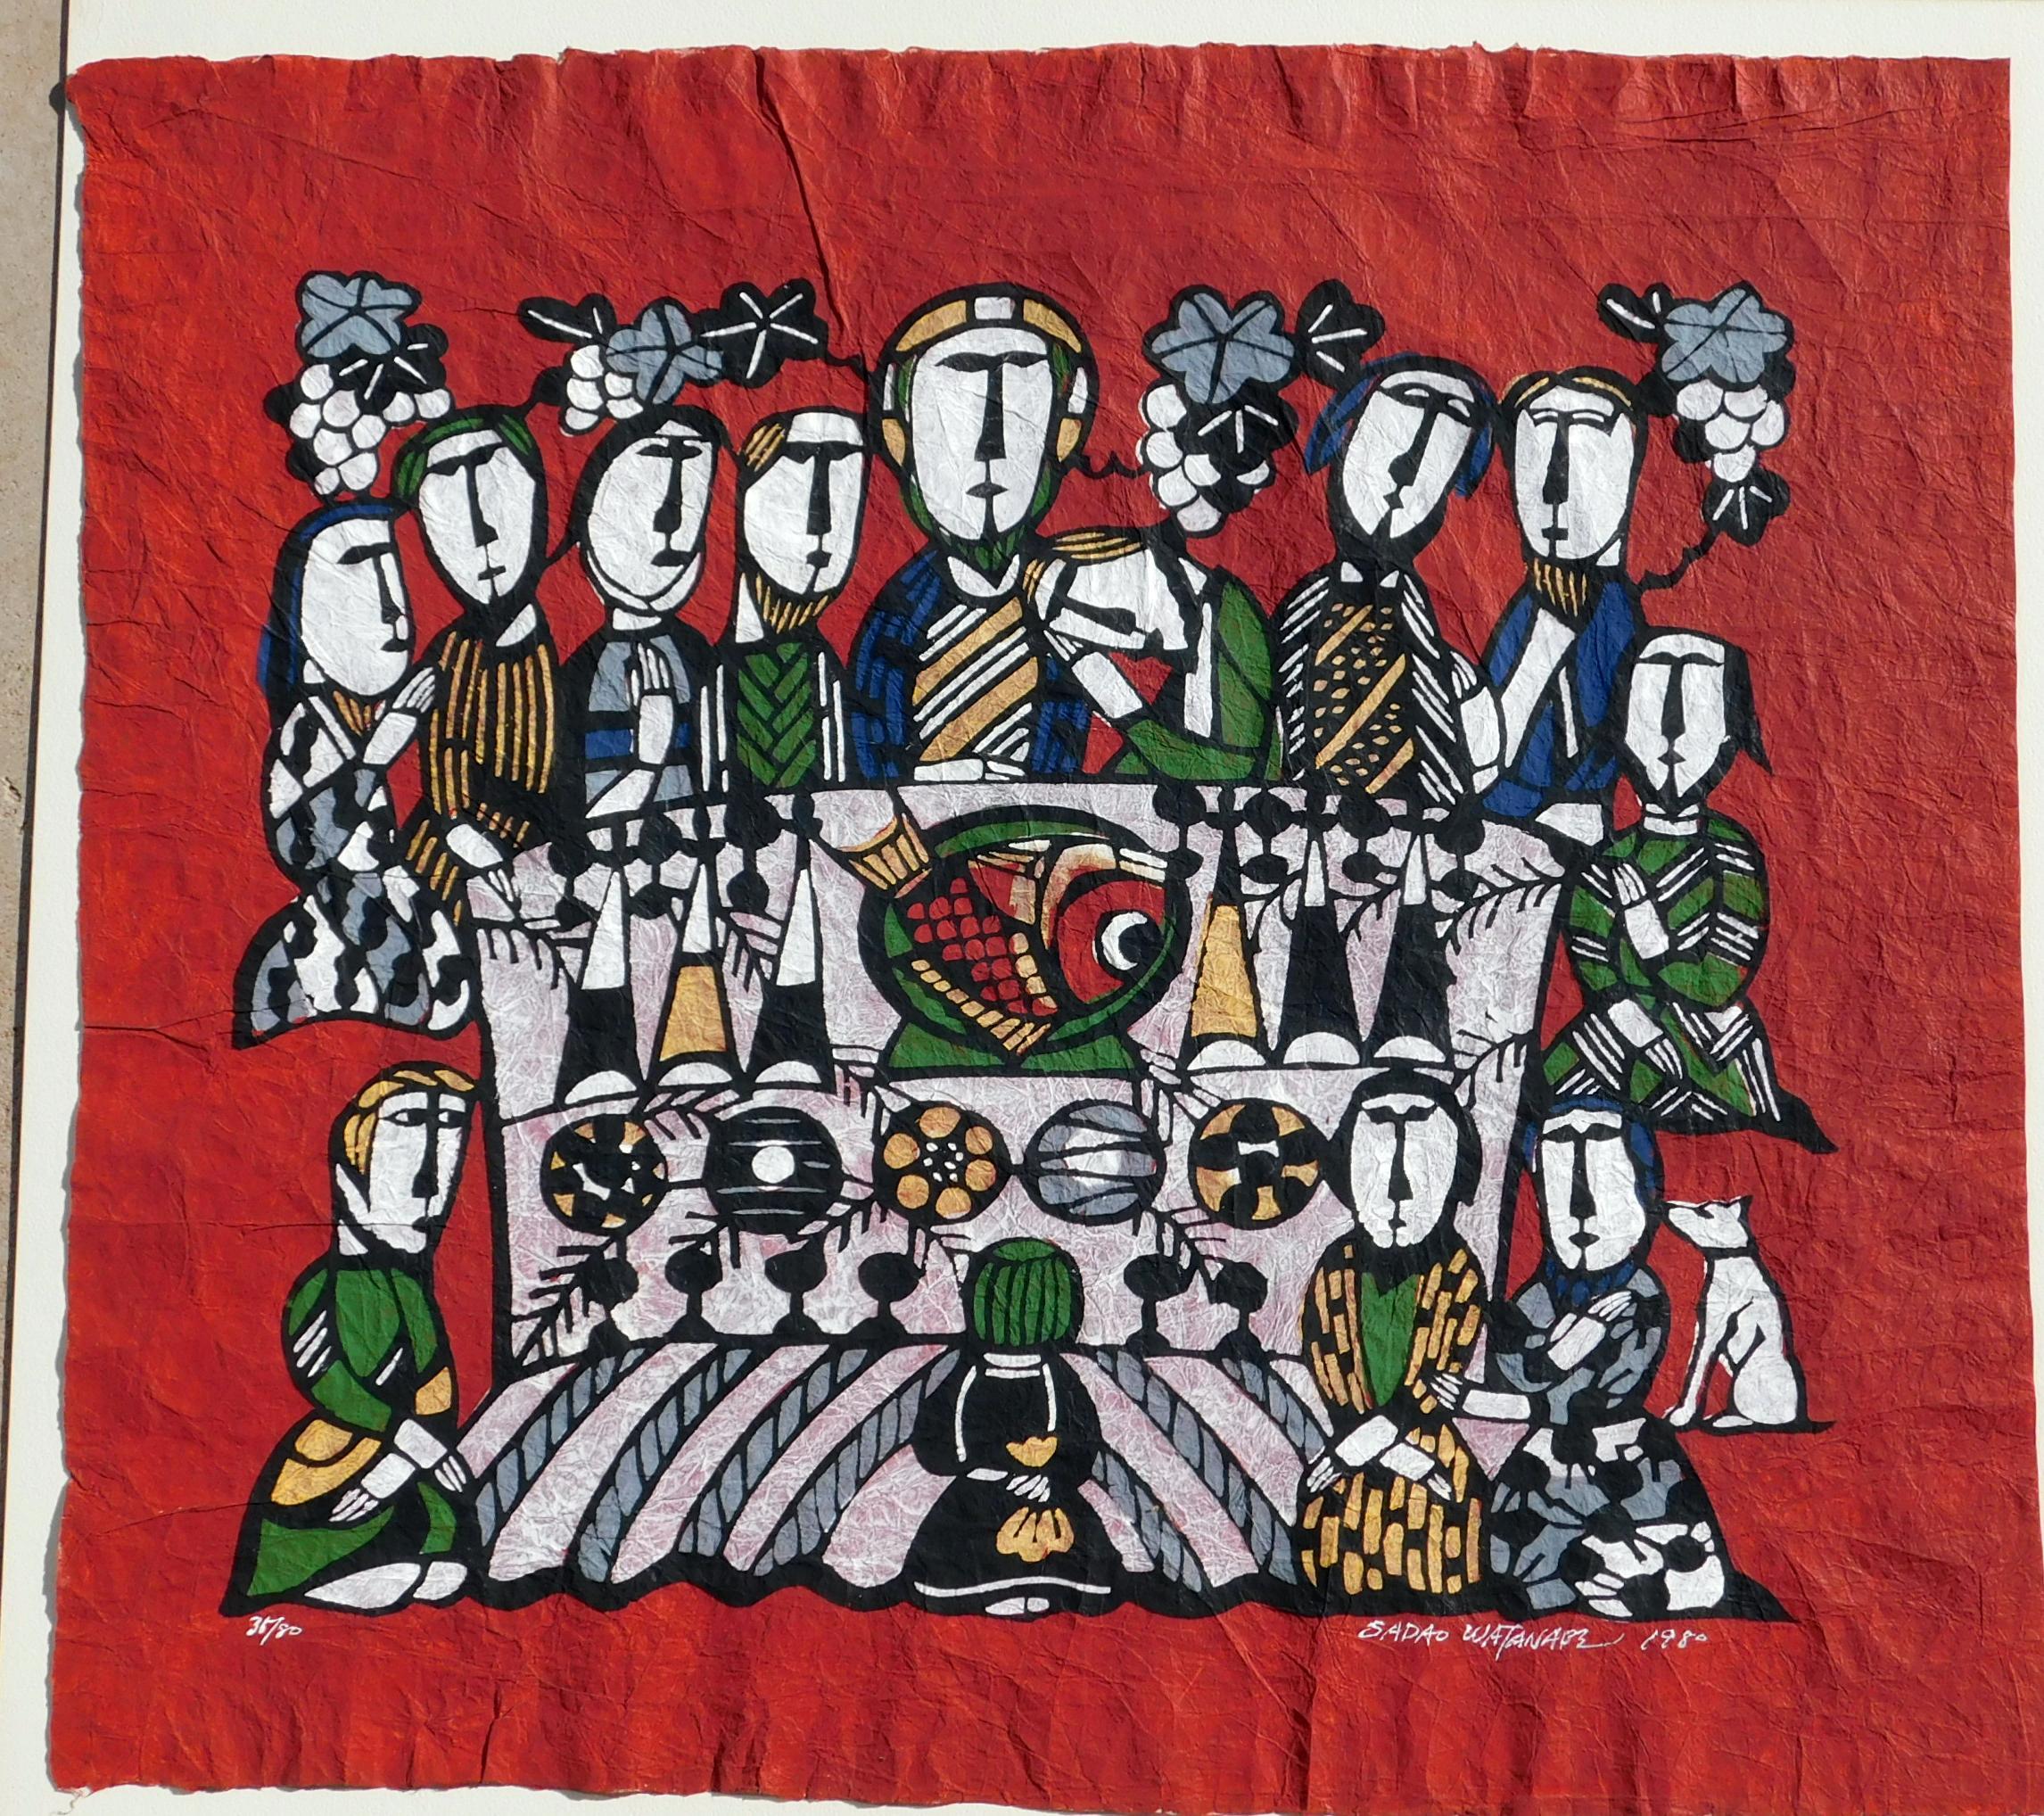 Sadao Watanabe (1913-1996) Limited Edition Stencil Print on Hand Made Paper  
Title: The Last Supper. Created 1980. No. 35 of the edition of 80.
Image size: 18